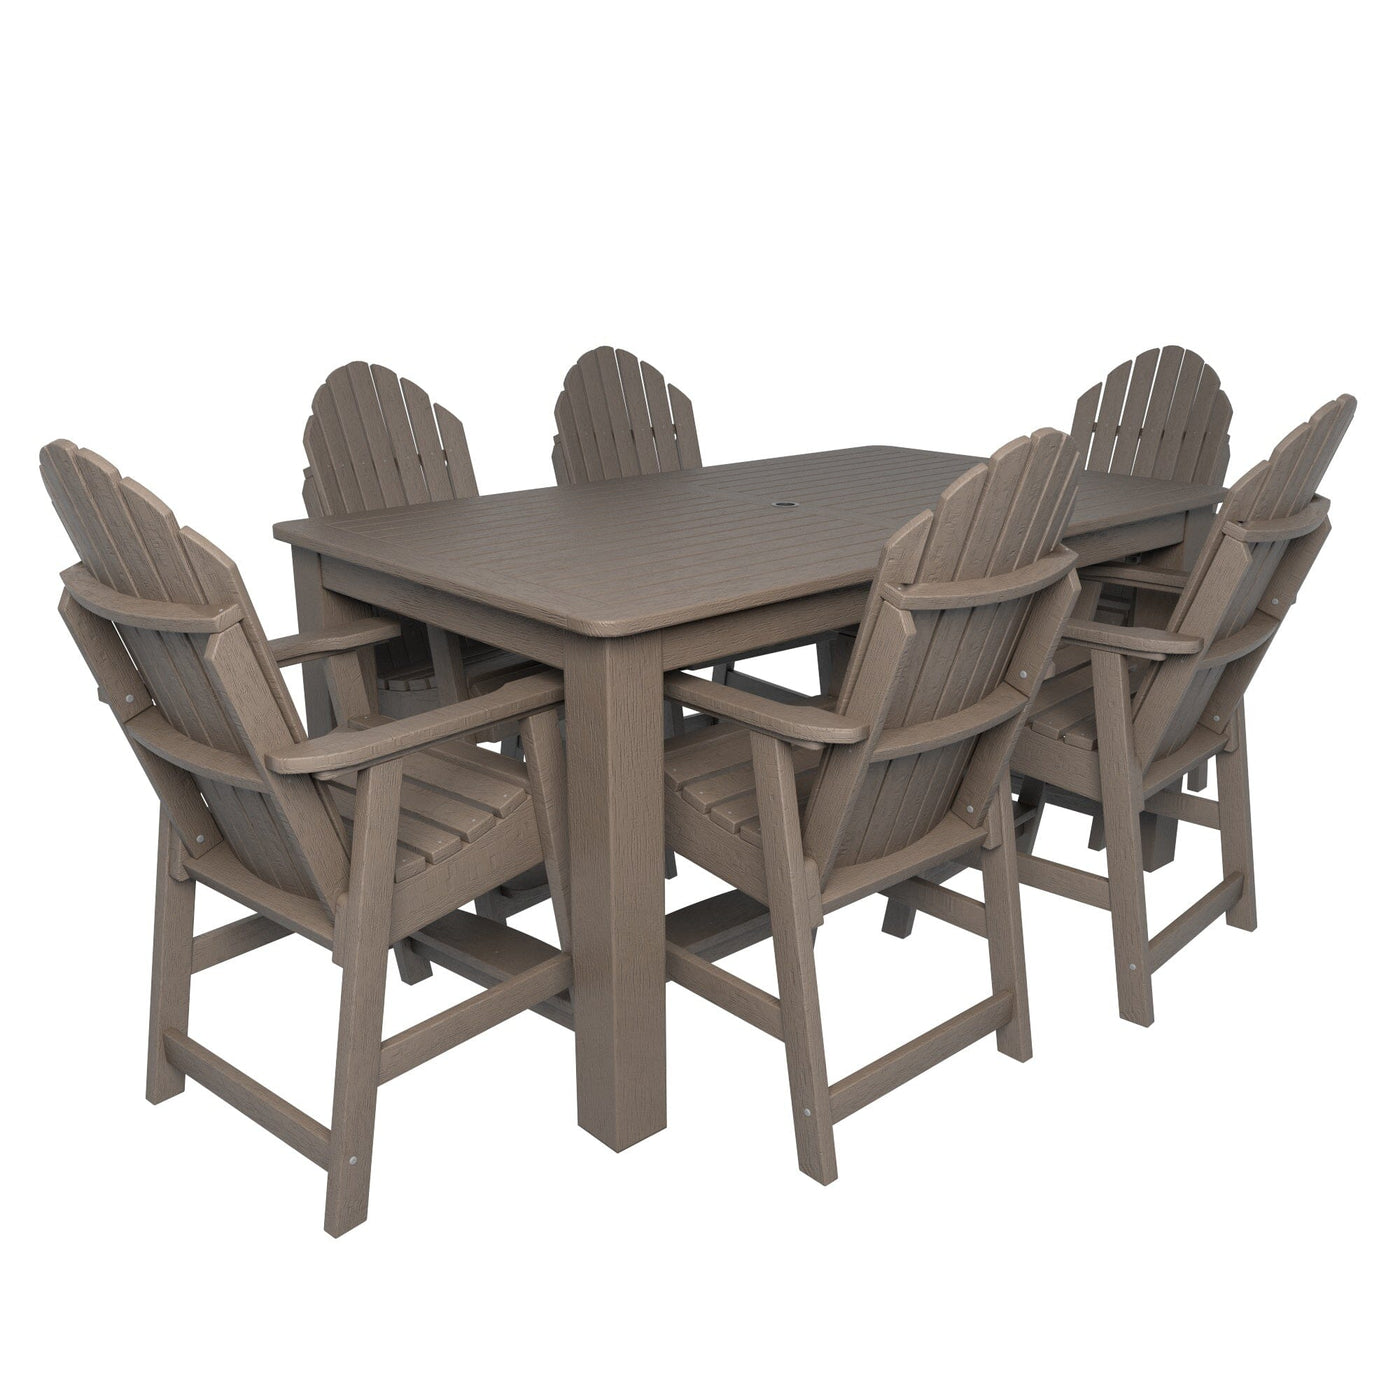 Hamilton 7pc Rectangular Outdoor Dining Set 42in x 72in - Counter Height Dining Highwood USA Woodland Brown 